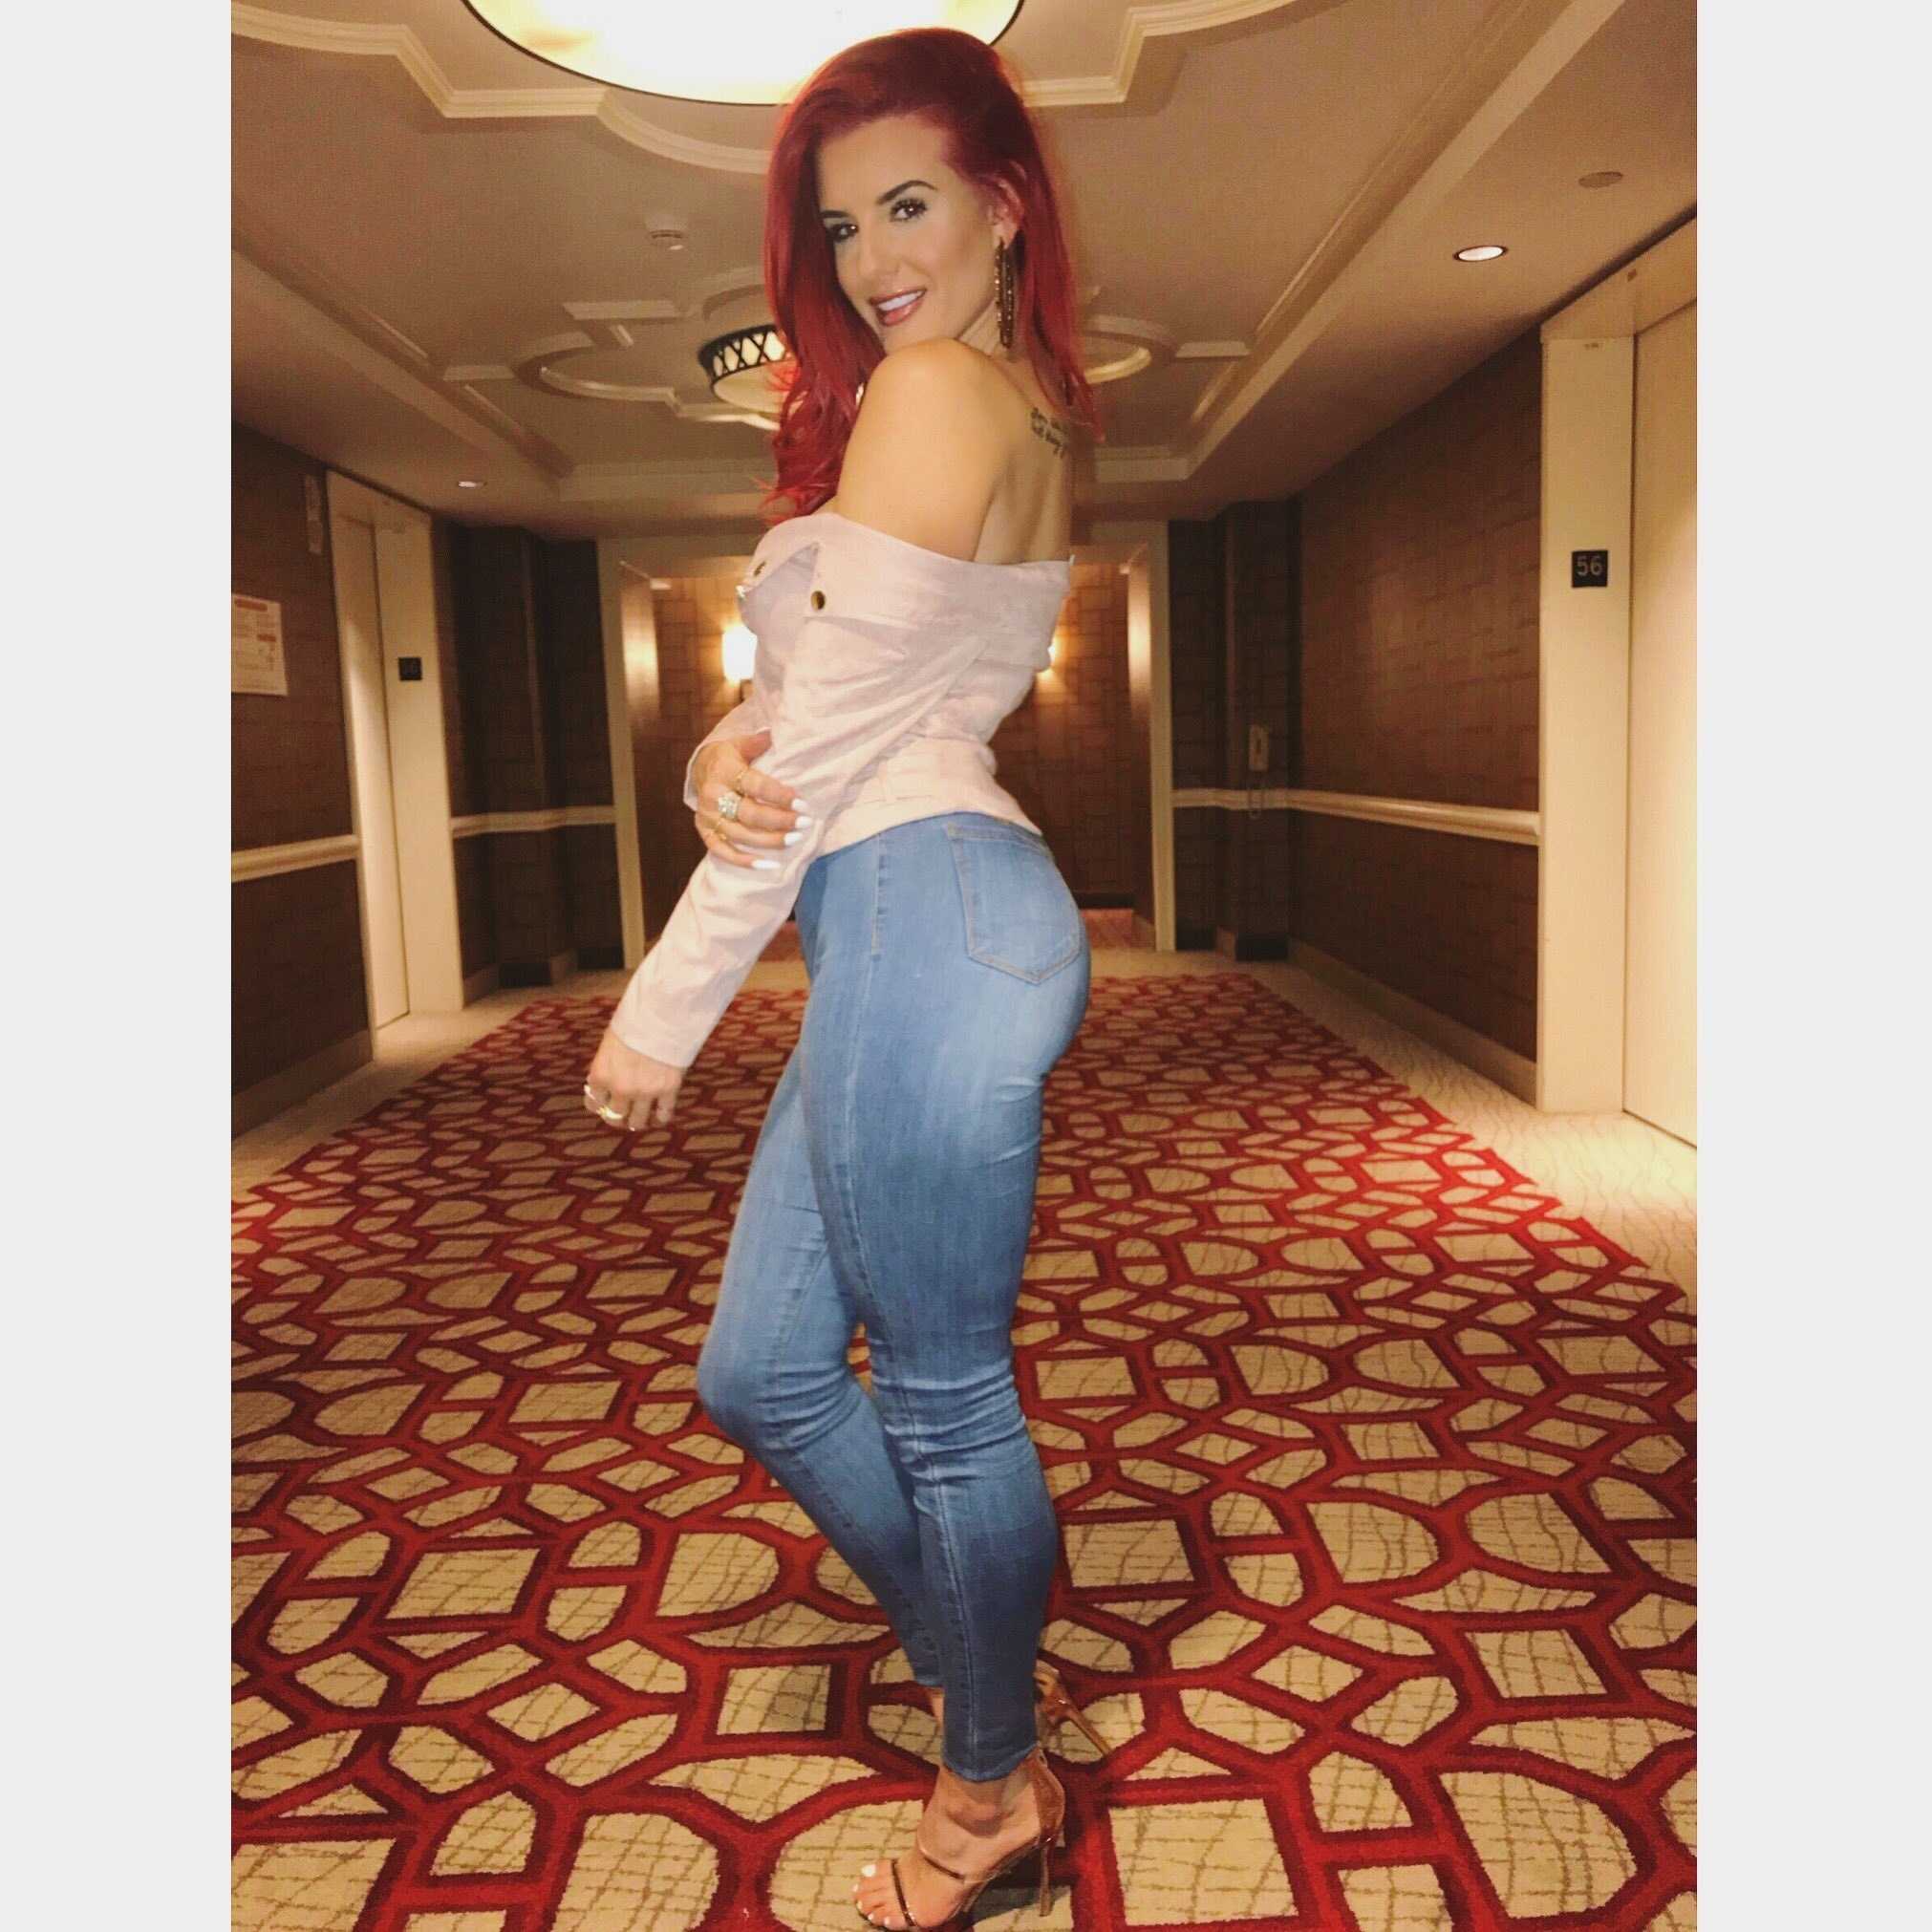 70+ Justina Valentine Hot Pictures Are Delight For Fans 331